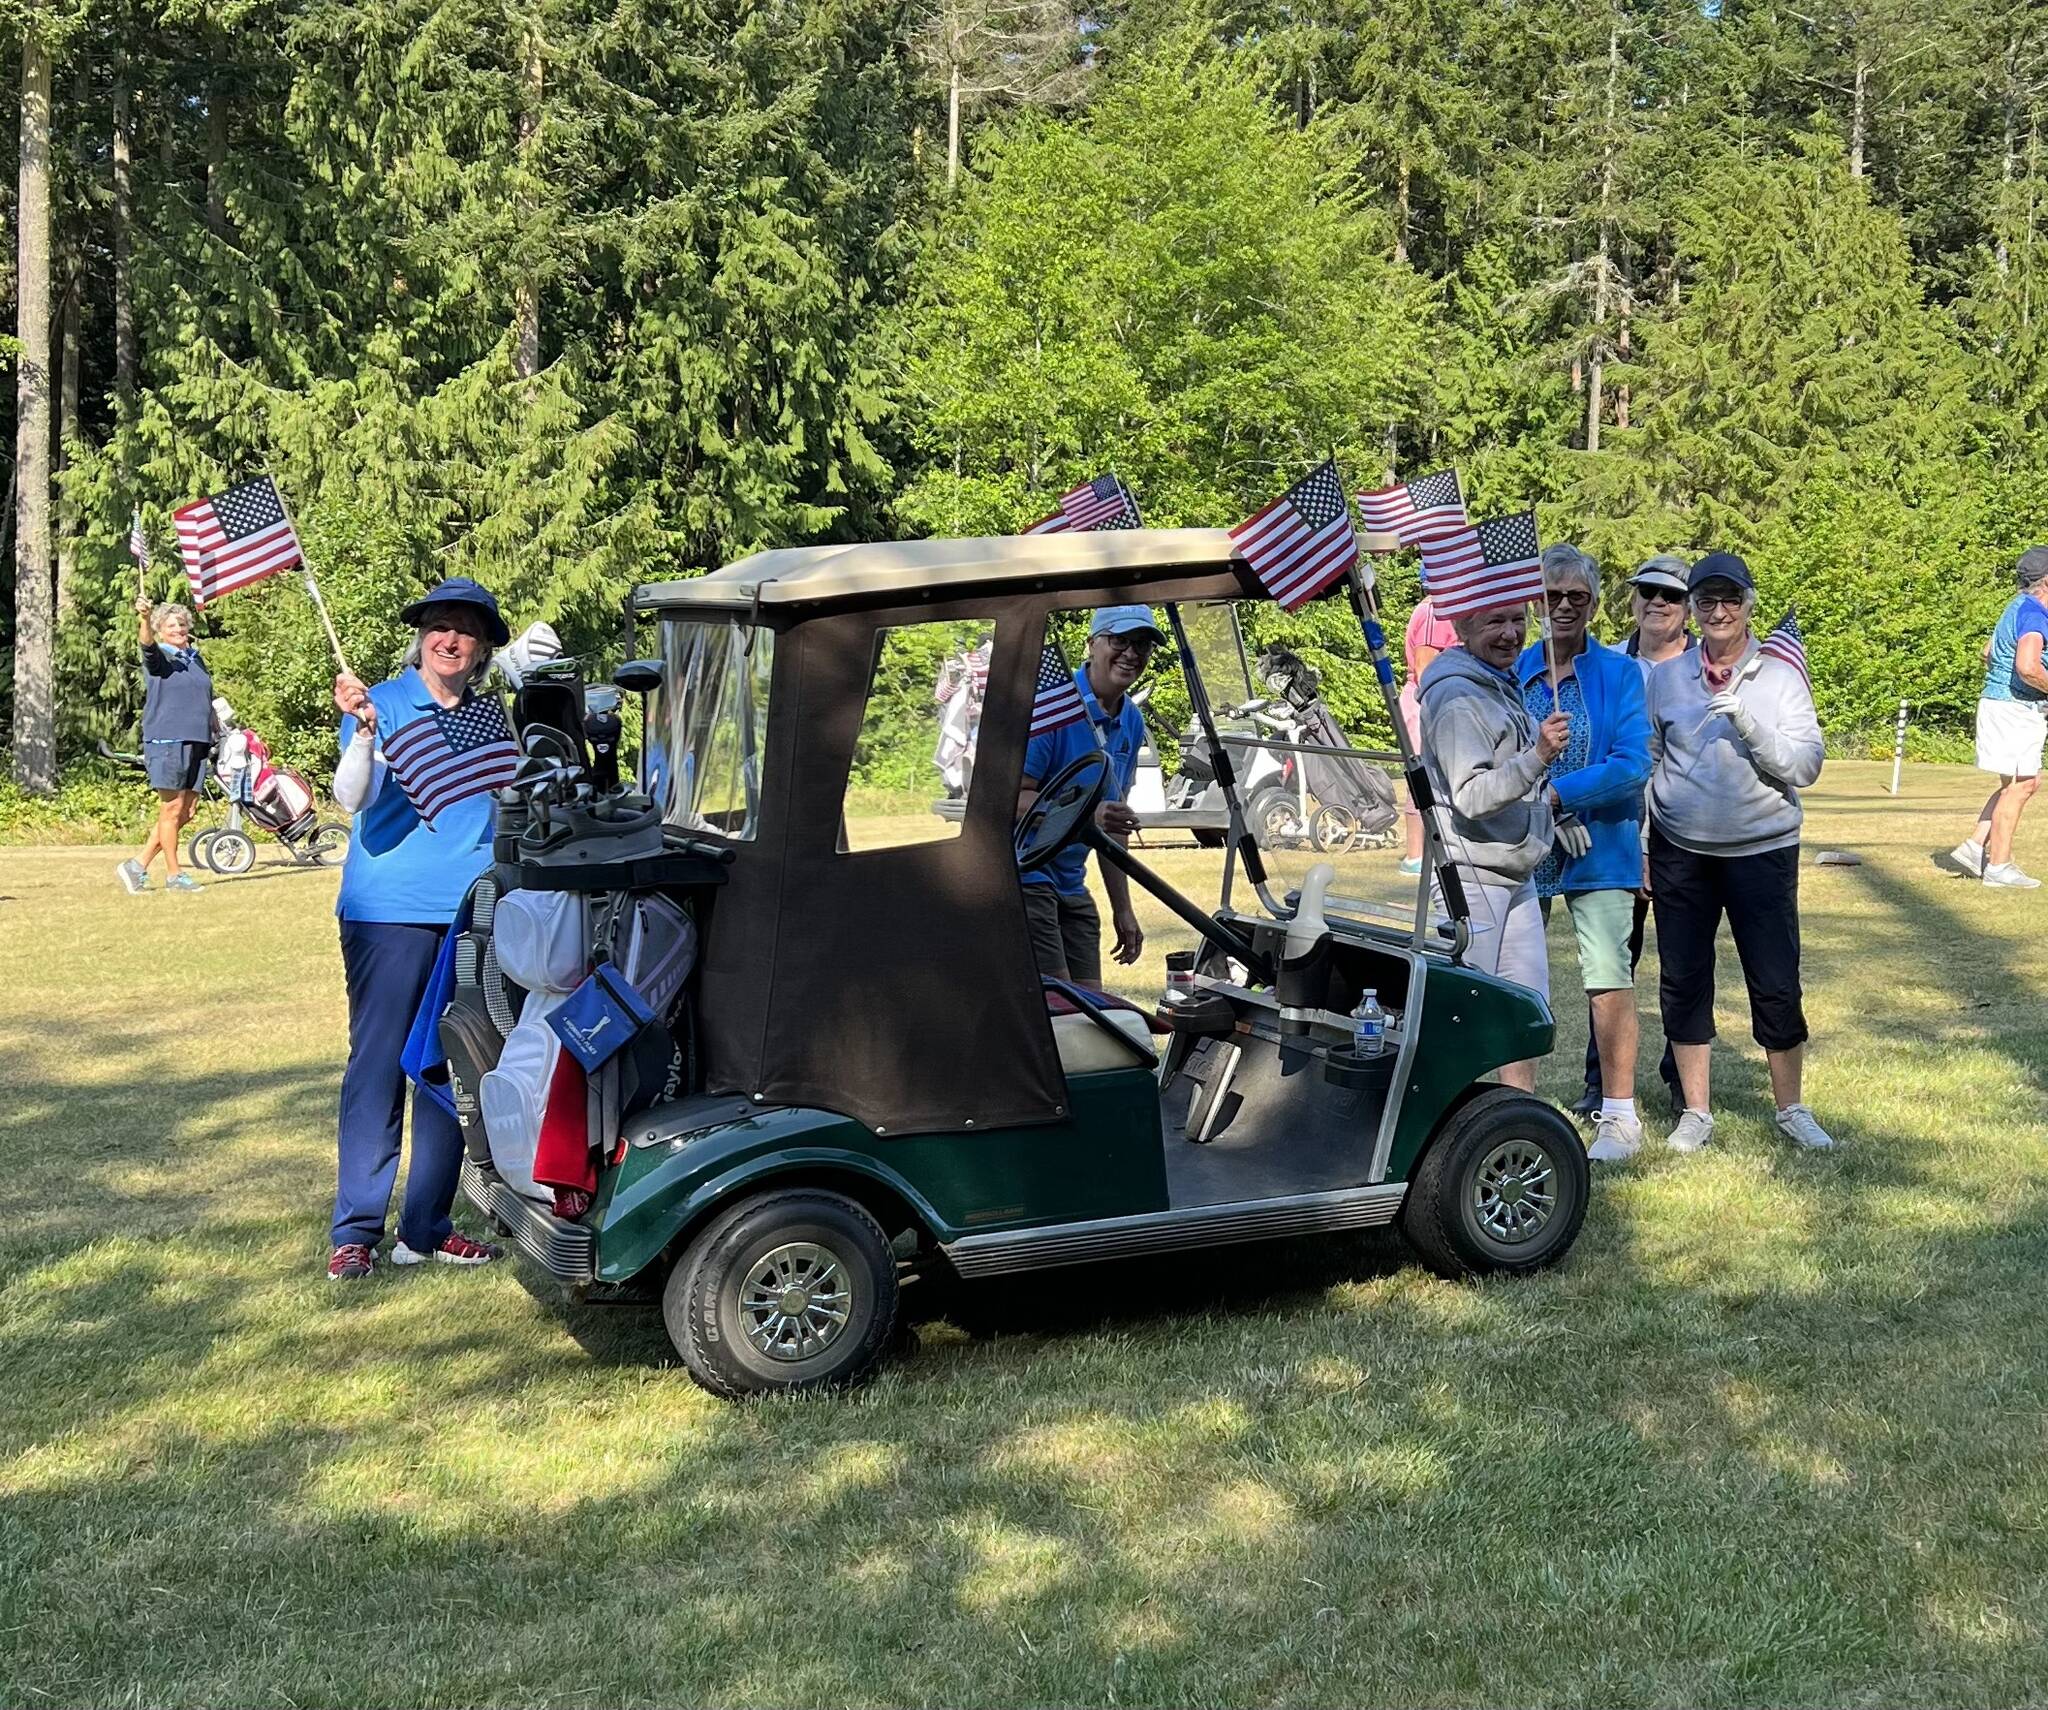 Members of the Discovery Bay Women’s Golf Club observed Memorial Day during their weekly play with a game of Flags.